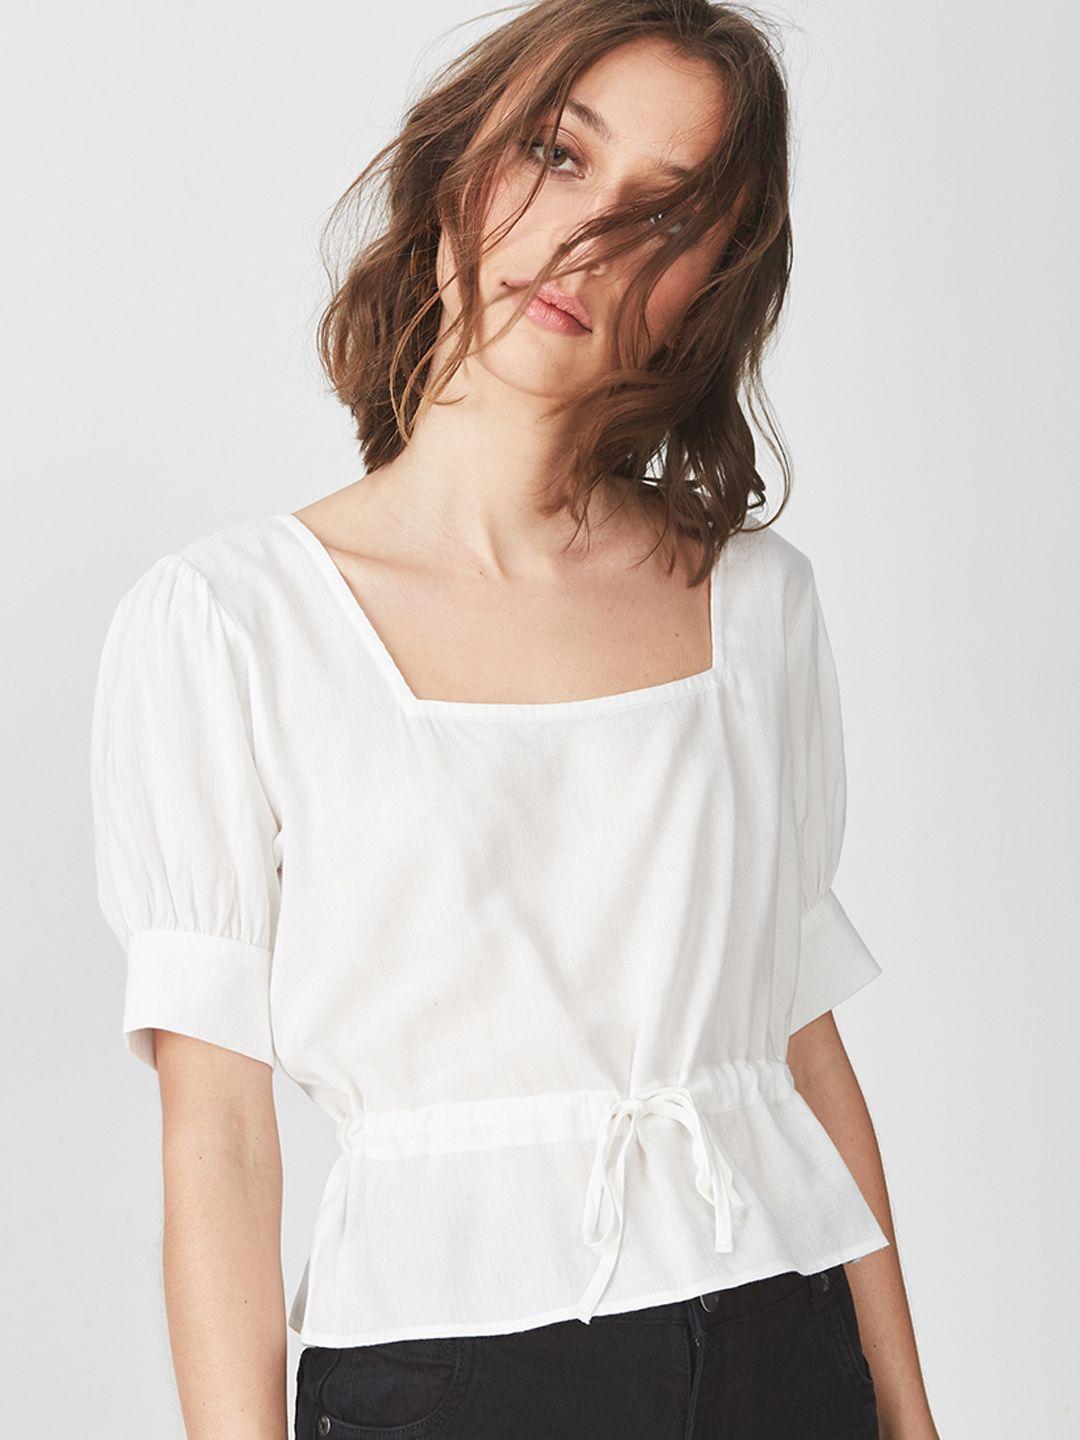 cotton on women white solid cinched waist top